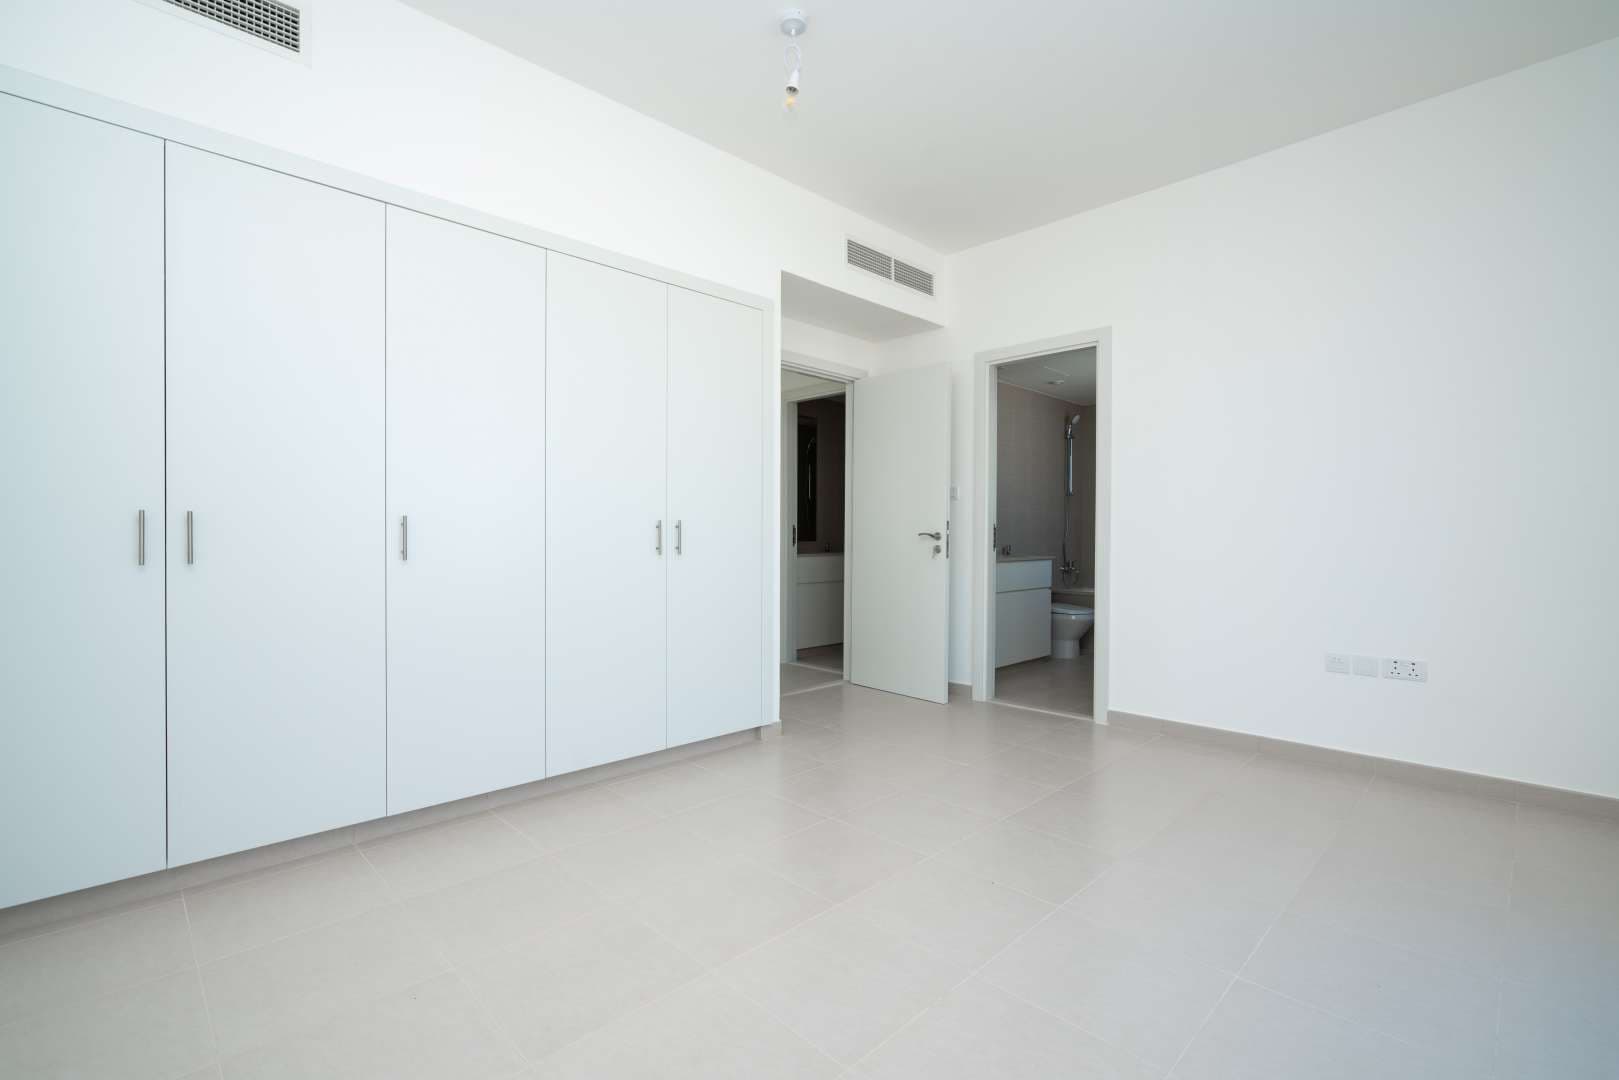 3 Bedroom Townhouse For Rent Zahra Townhouses Lp05539 1750b5a07526db00.jpg